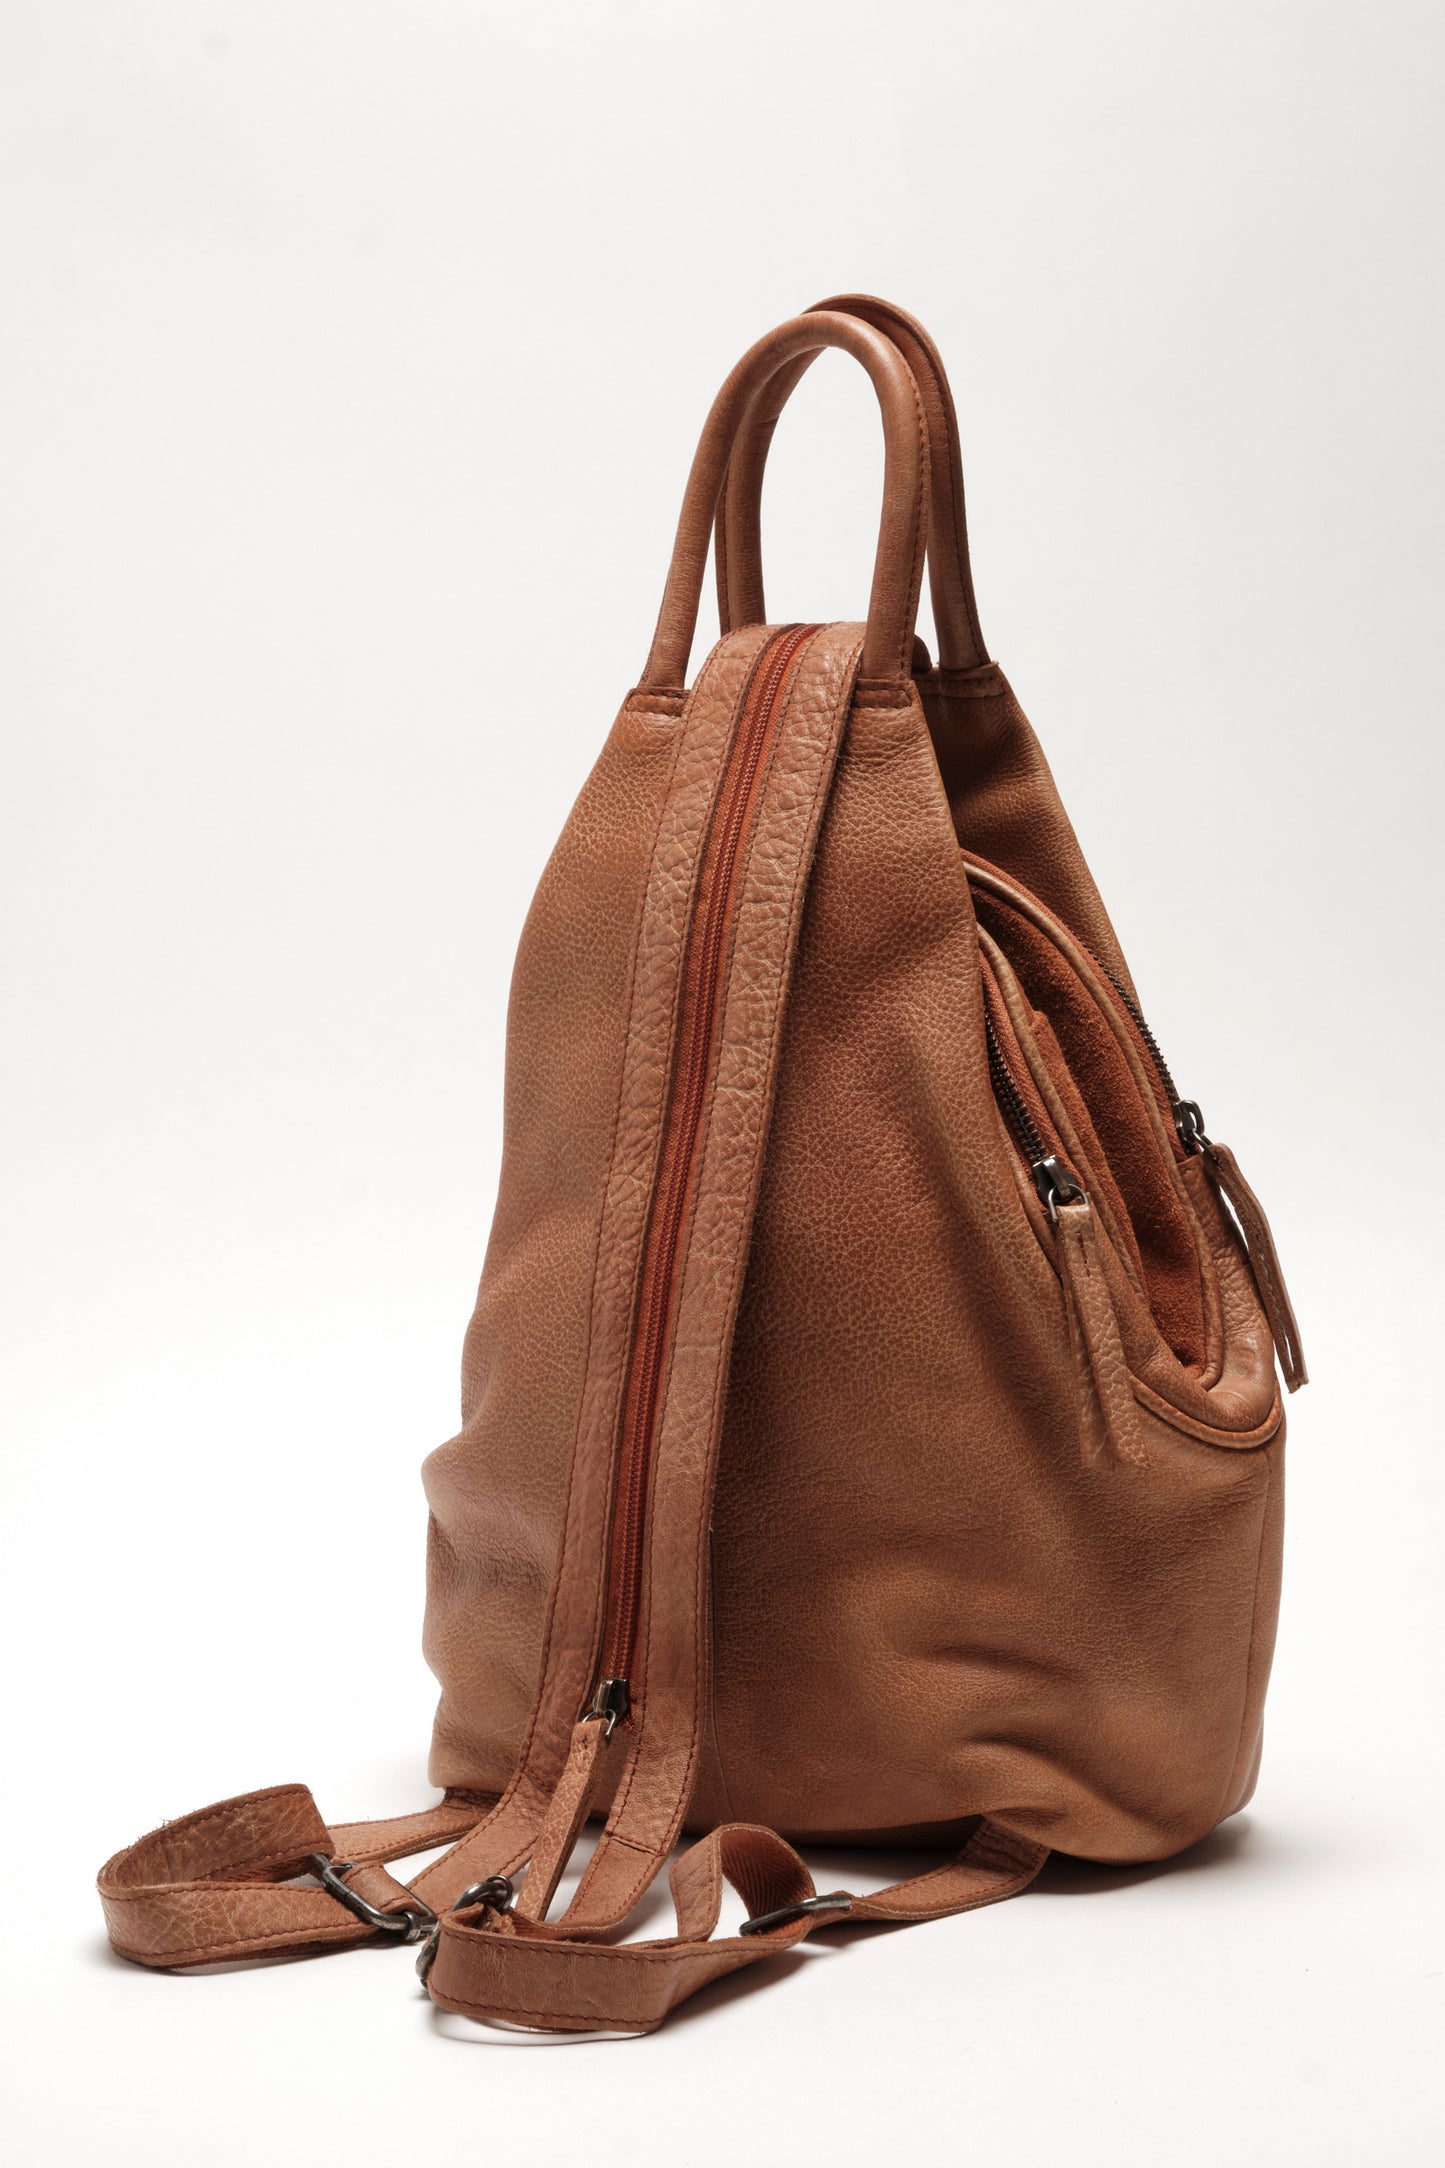 FREE PEOPLE WE THE FREE SOHO CONVERTIBLE TOTE BAG DISTRESSED BROWN